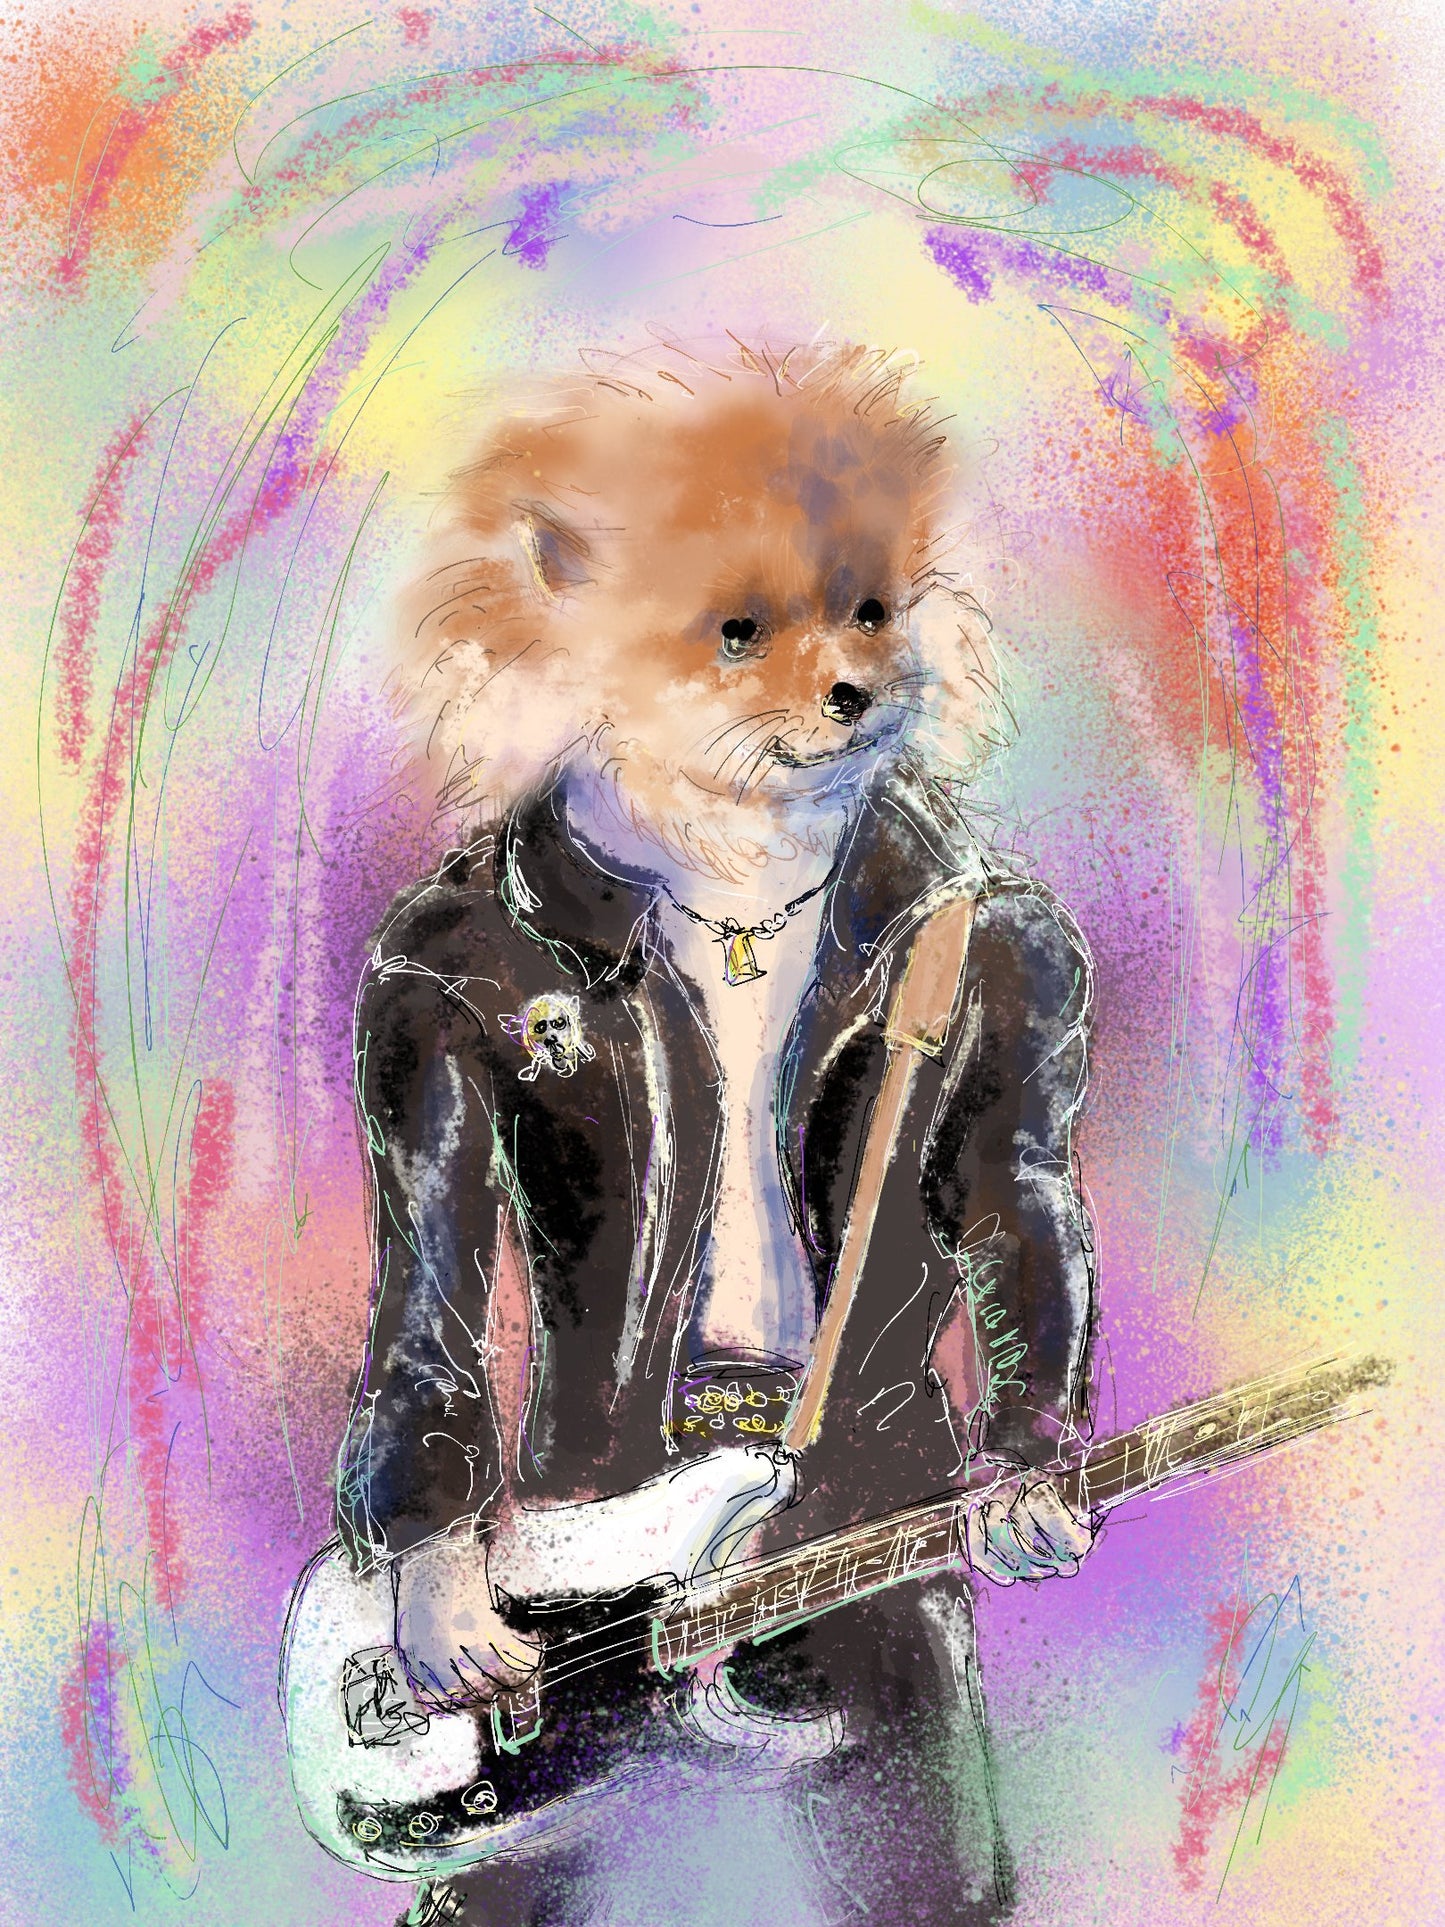 The Punk Dog - FROM ARTIST